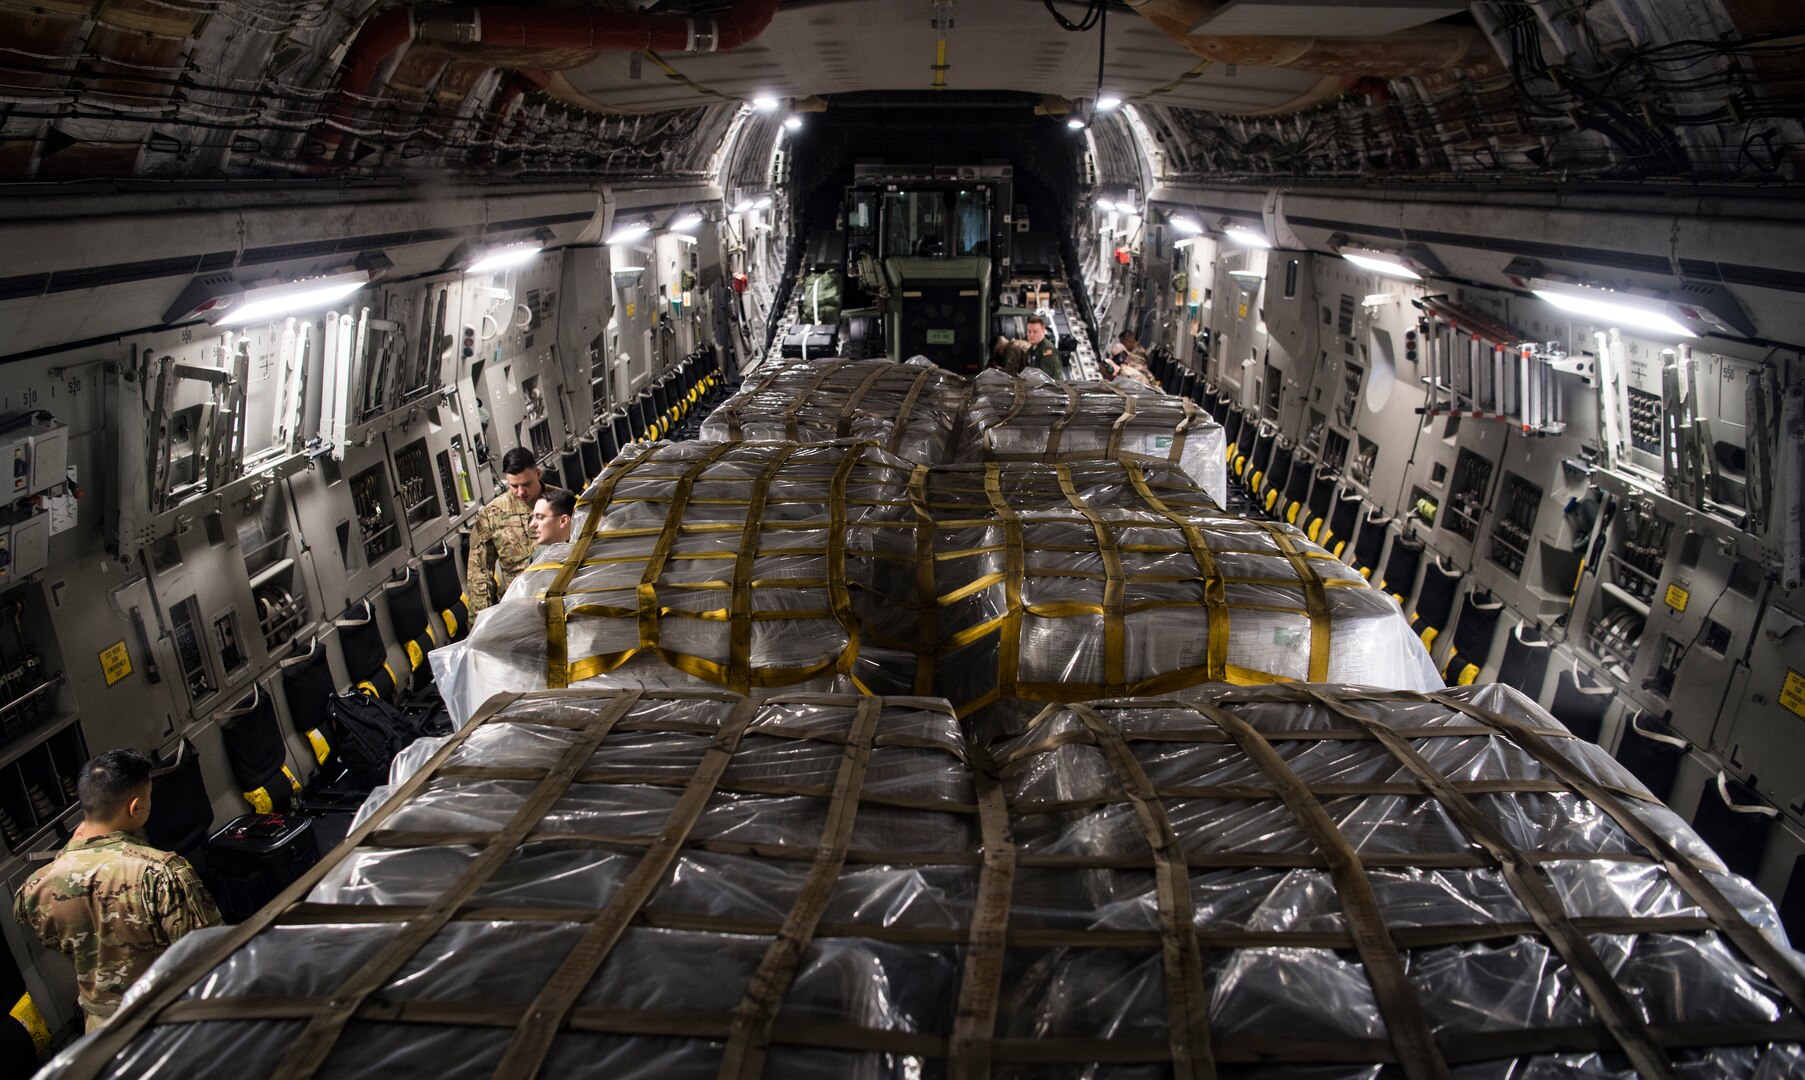 C-17 Globemaster III's deliver humanitarian aid from Homestead Air Reserve Base, FL to Cucuta, Colombia February 16, 2019.